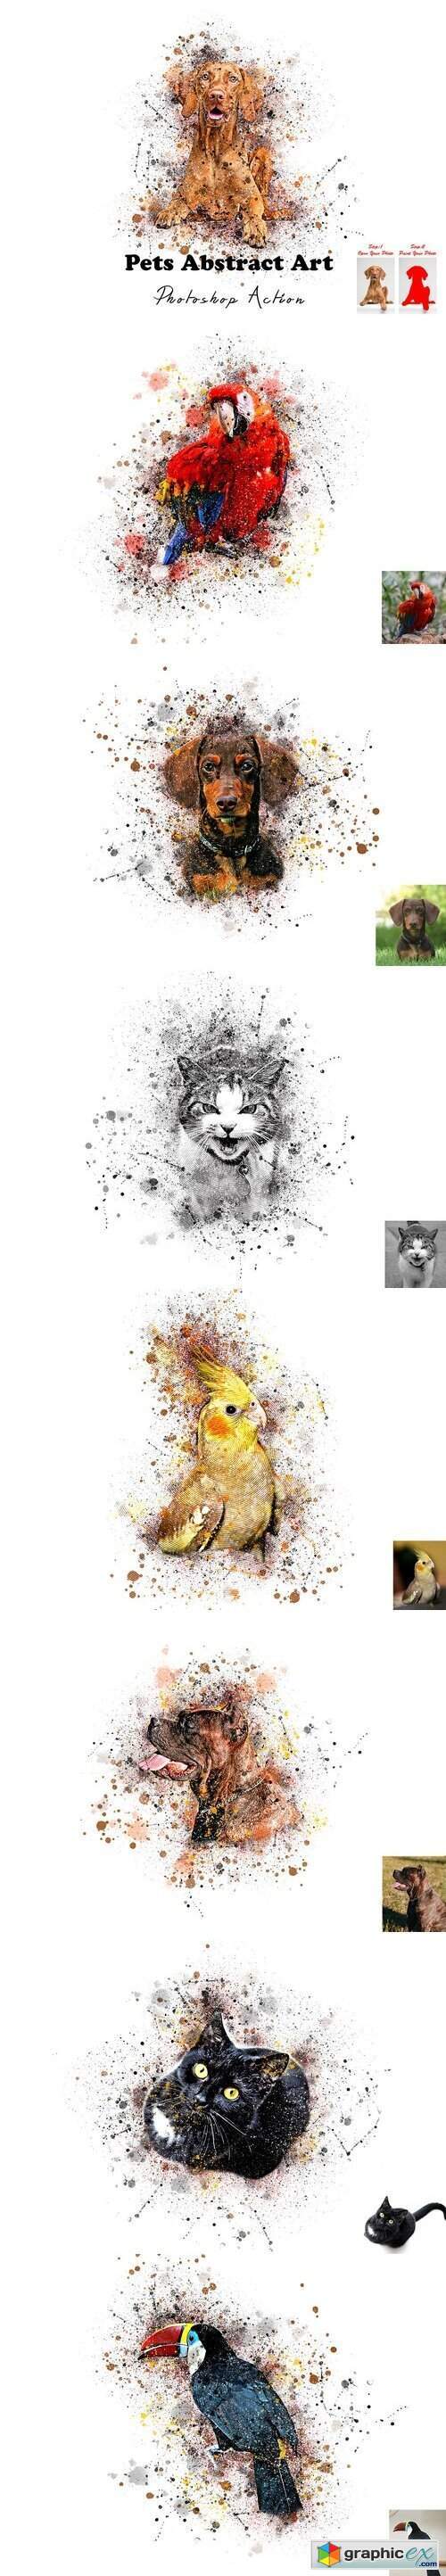 Pets Abstract Art Photoshop Action